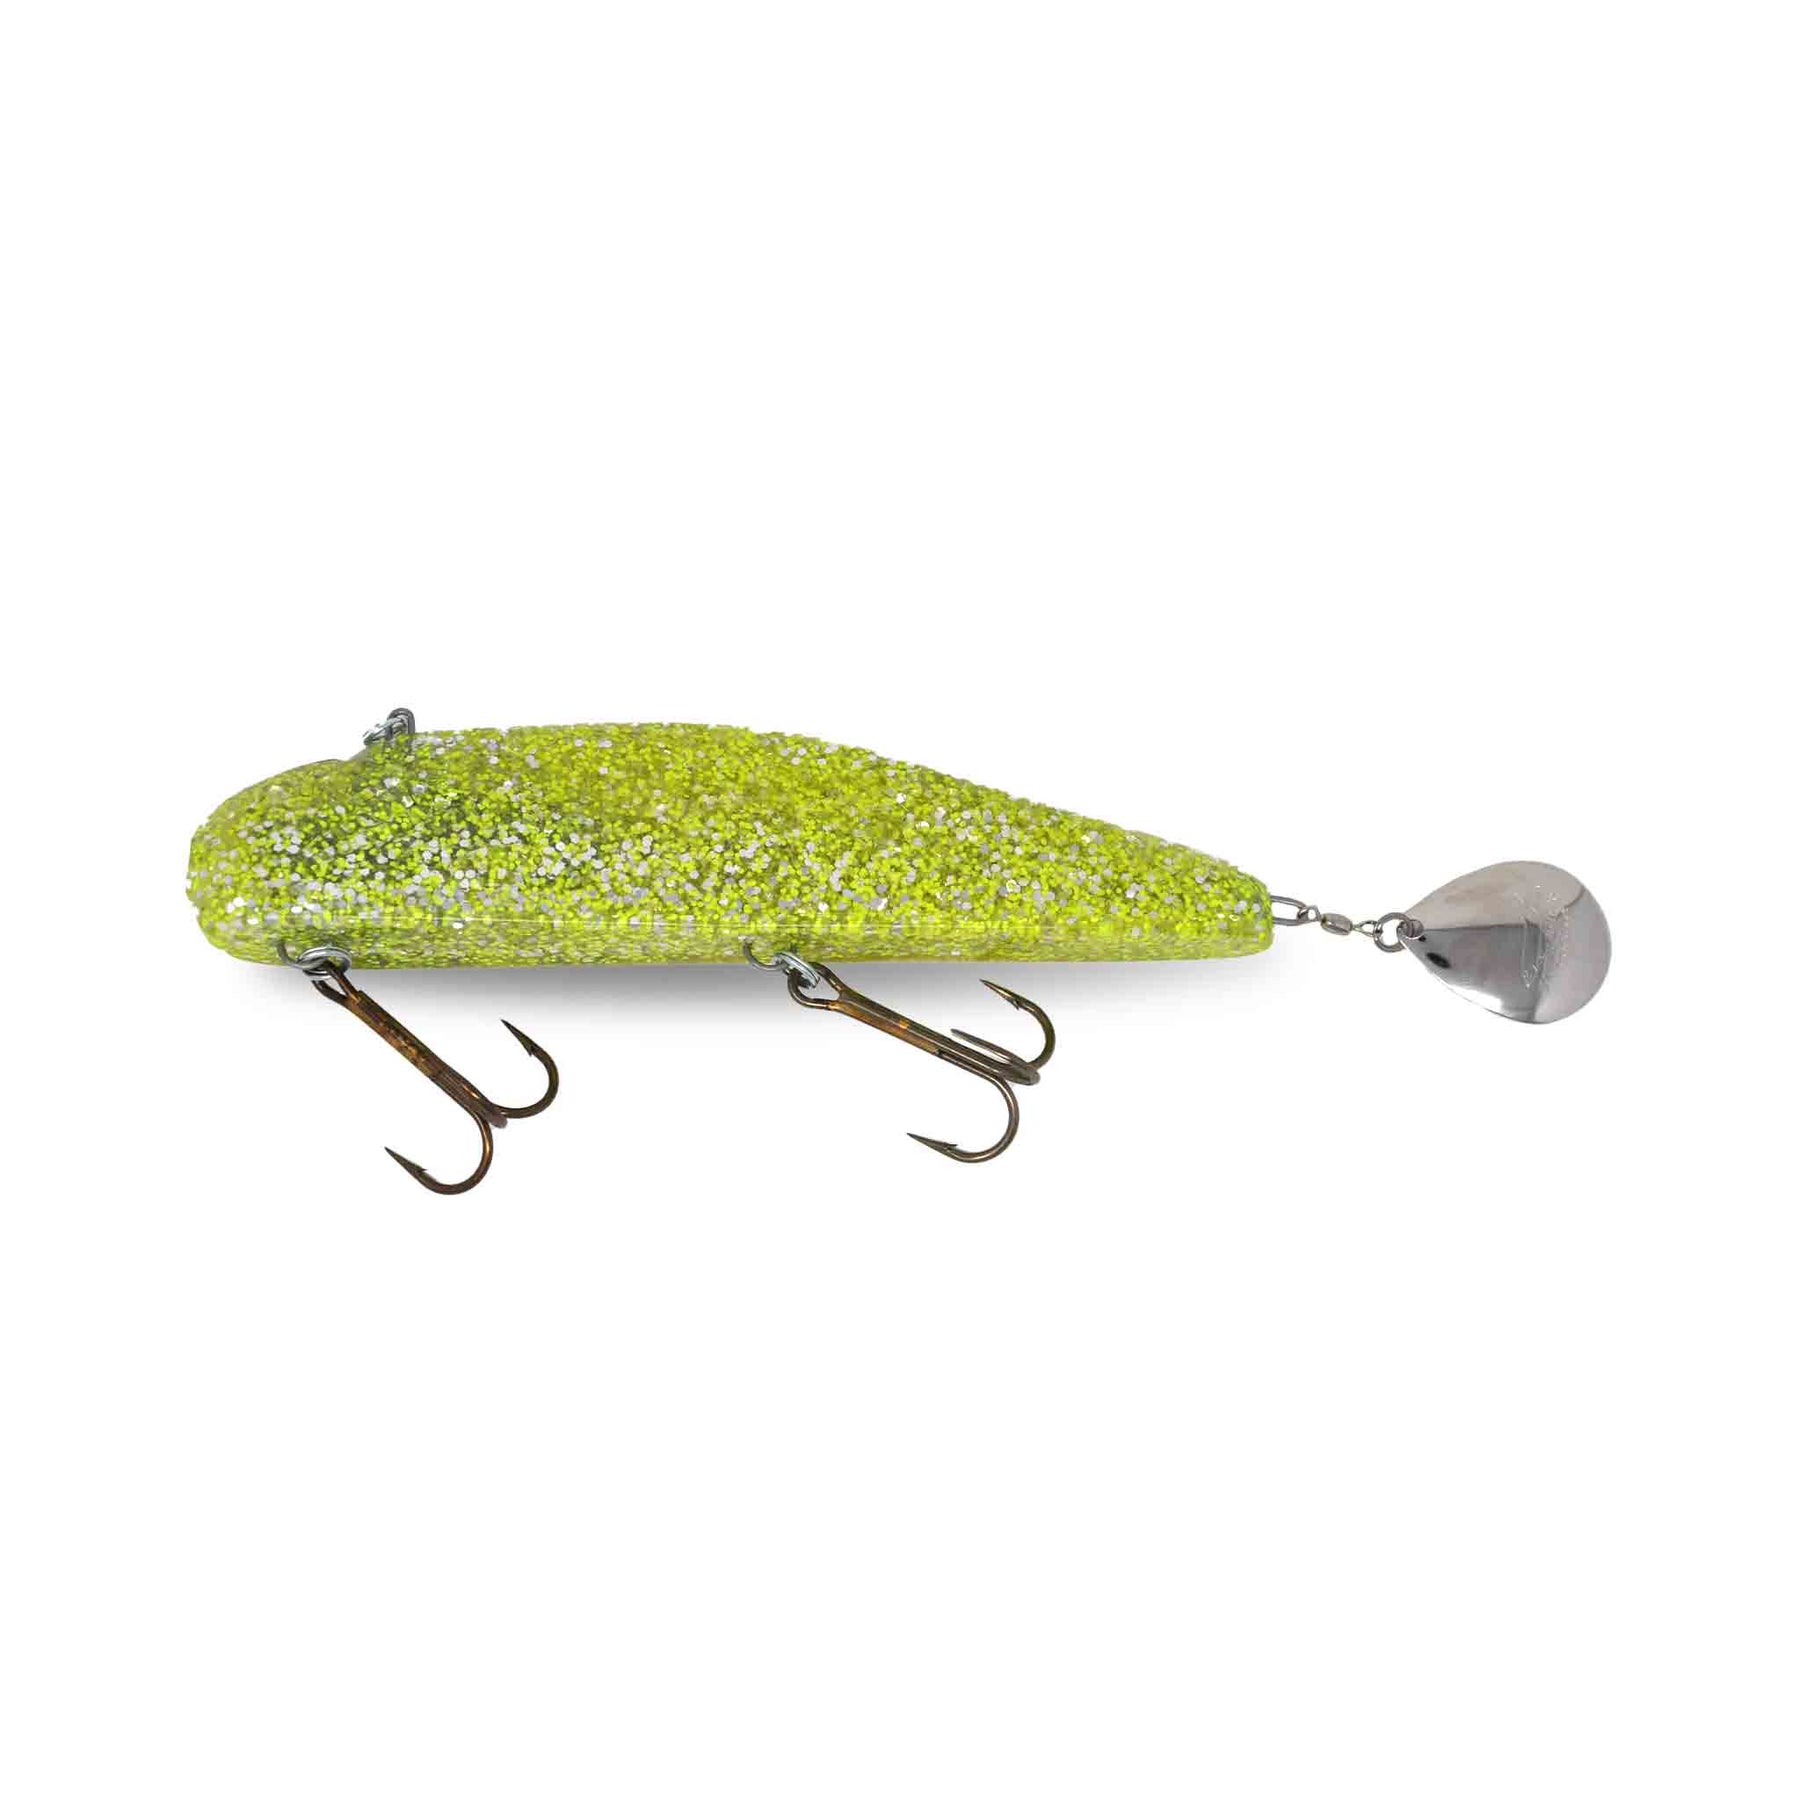 View of Jigs-Spoons Bondy Bait Original Spintail Jig Yellow Snow available at EZOKO Pike and Musky Shop